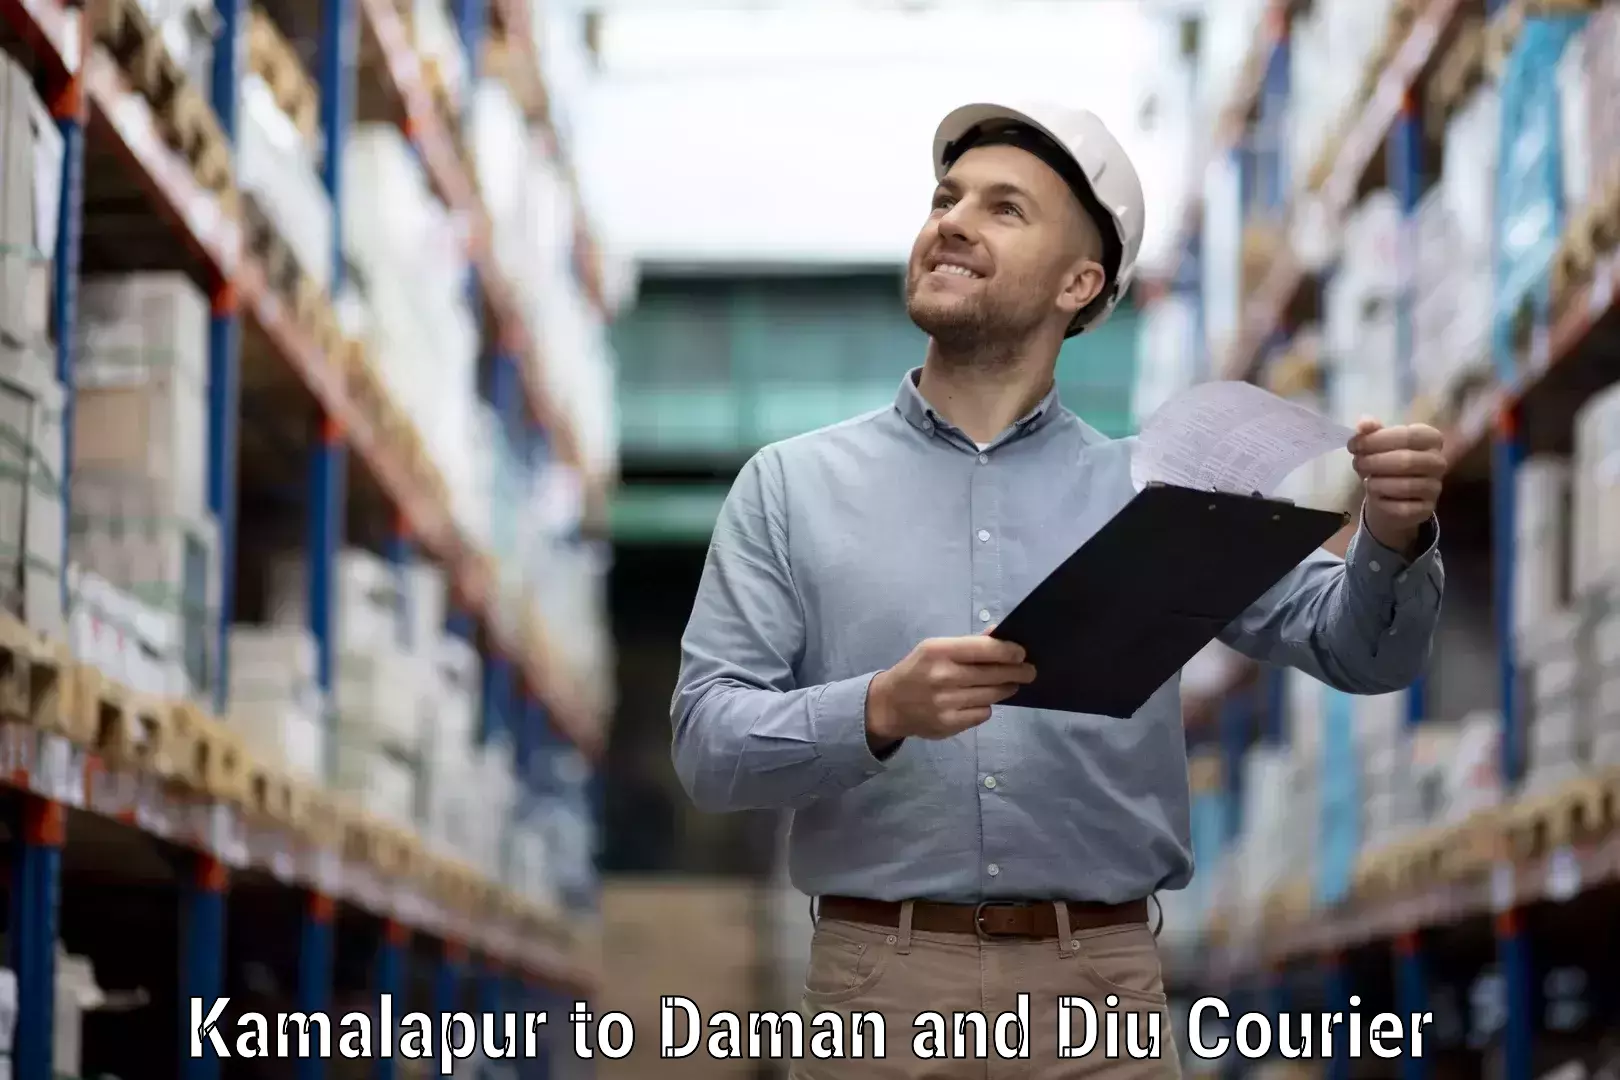 Reliable delivery network Kamalapur to Daman and Diu